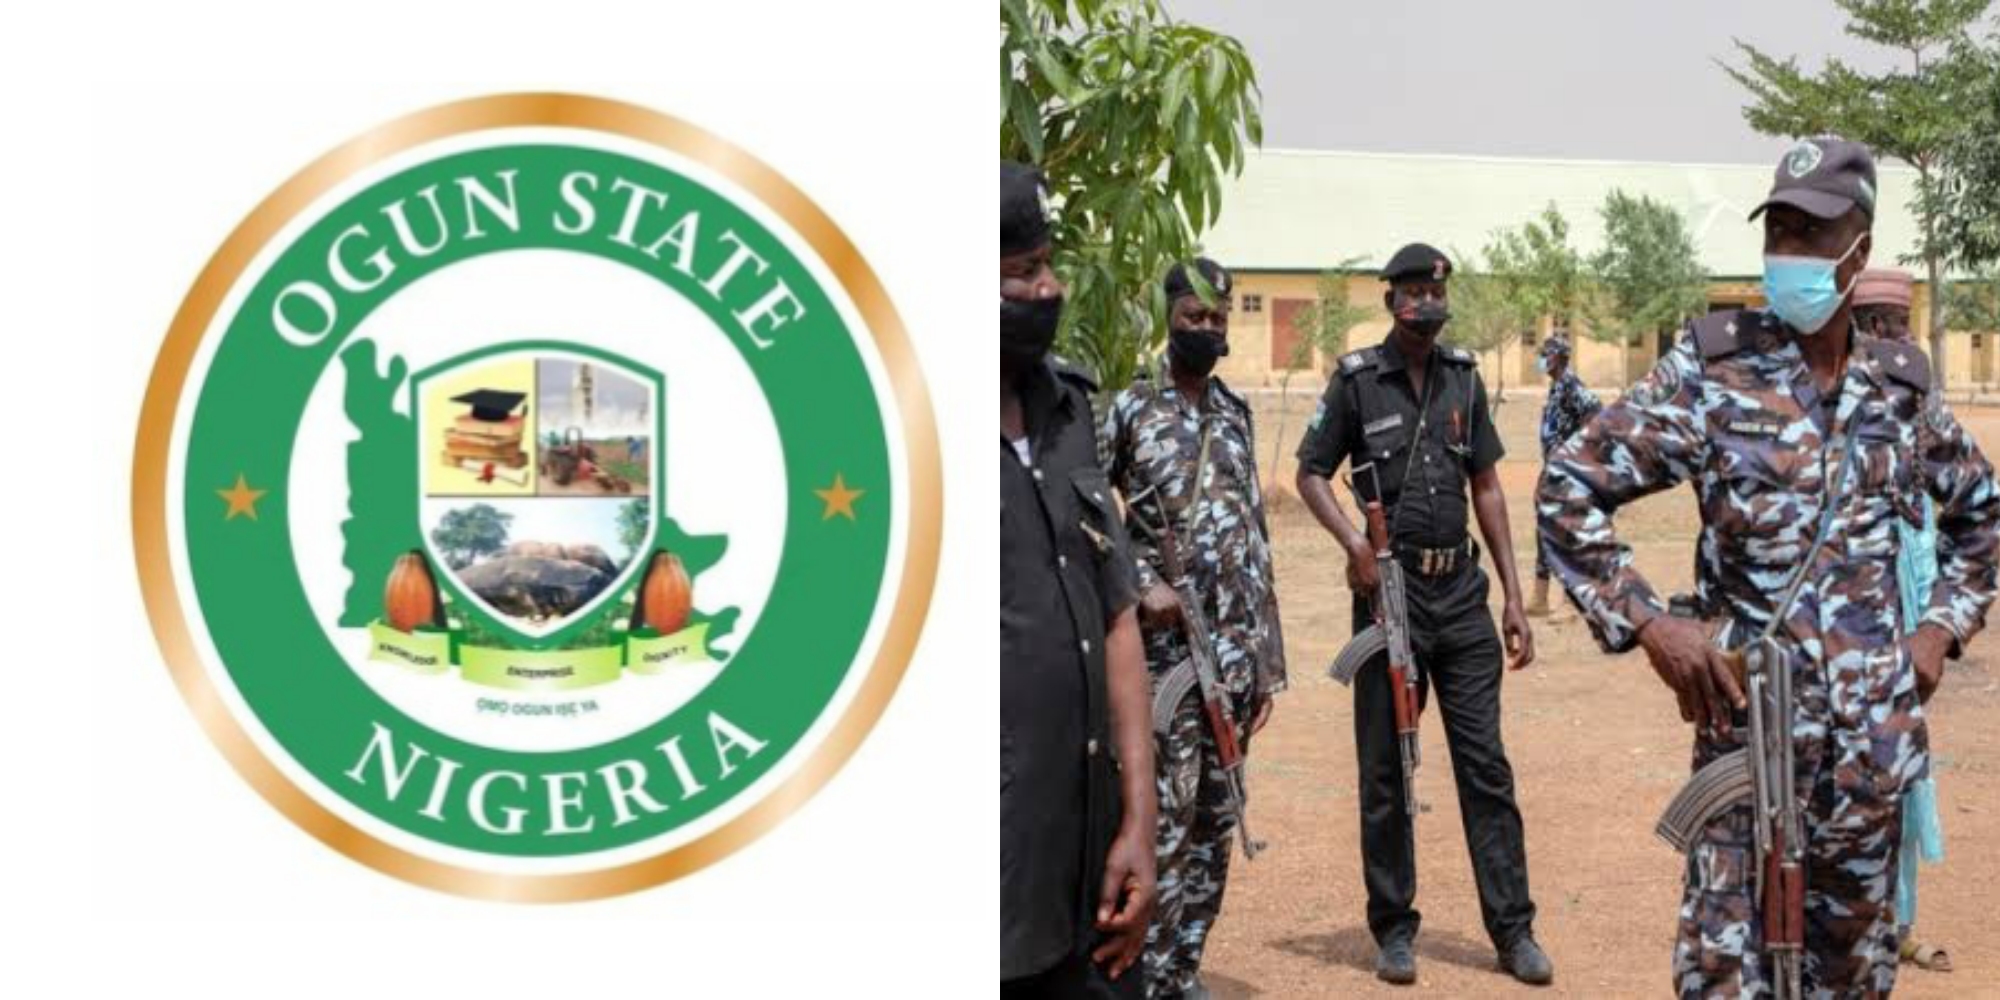 Thieves cart away hospital equipments worth millions in Ogun State